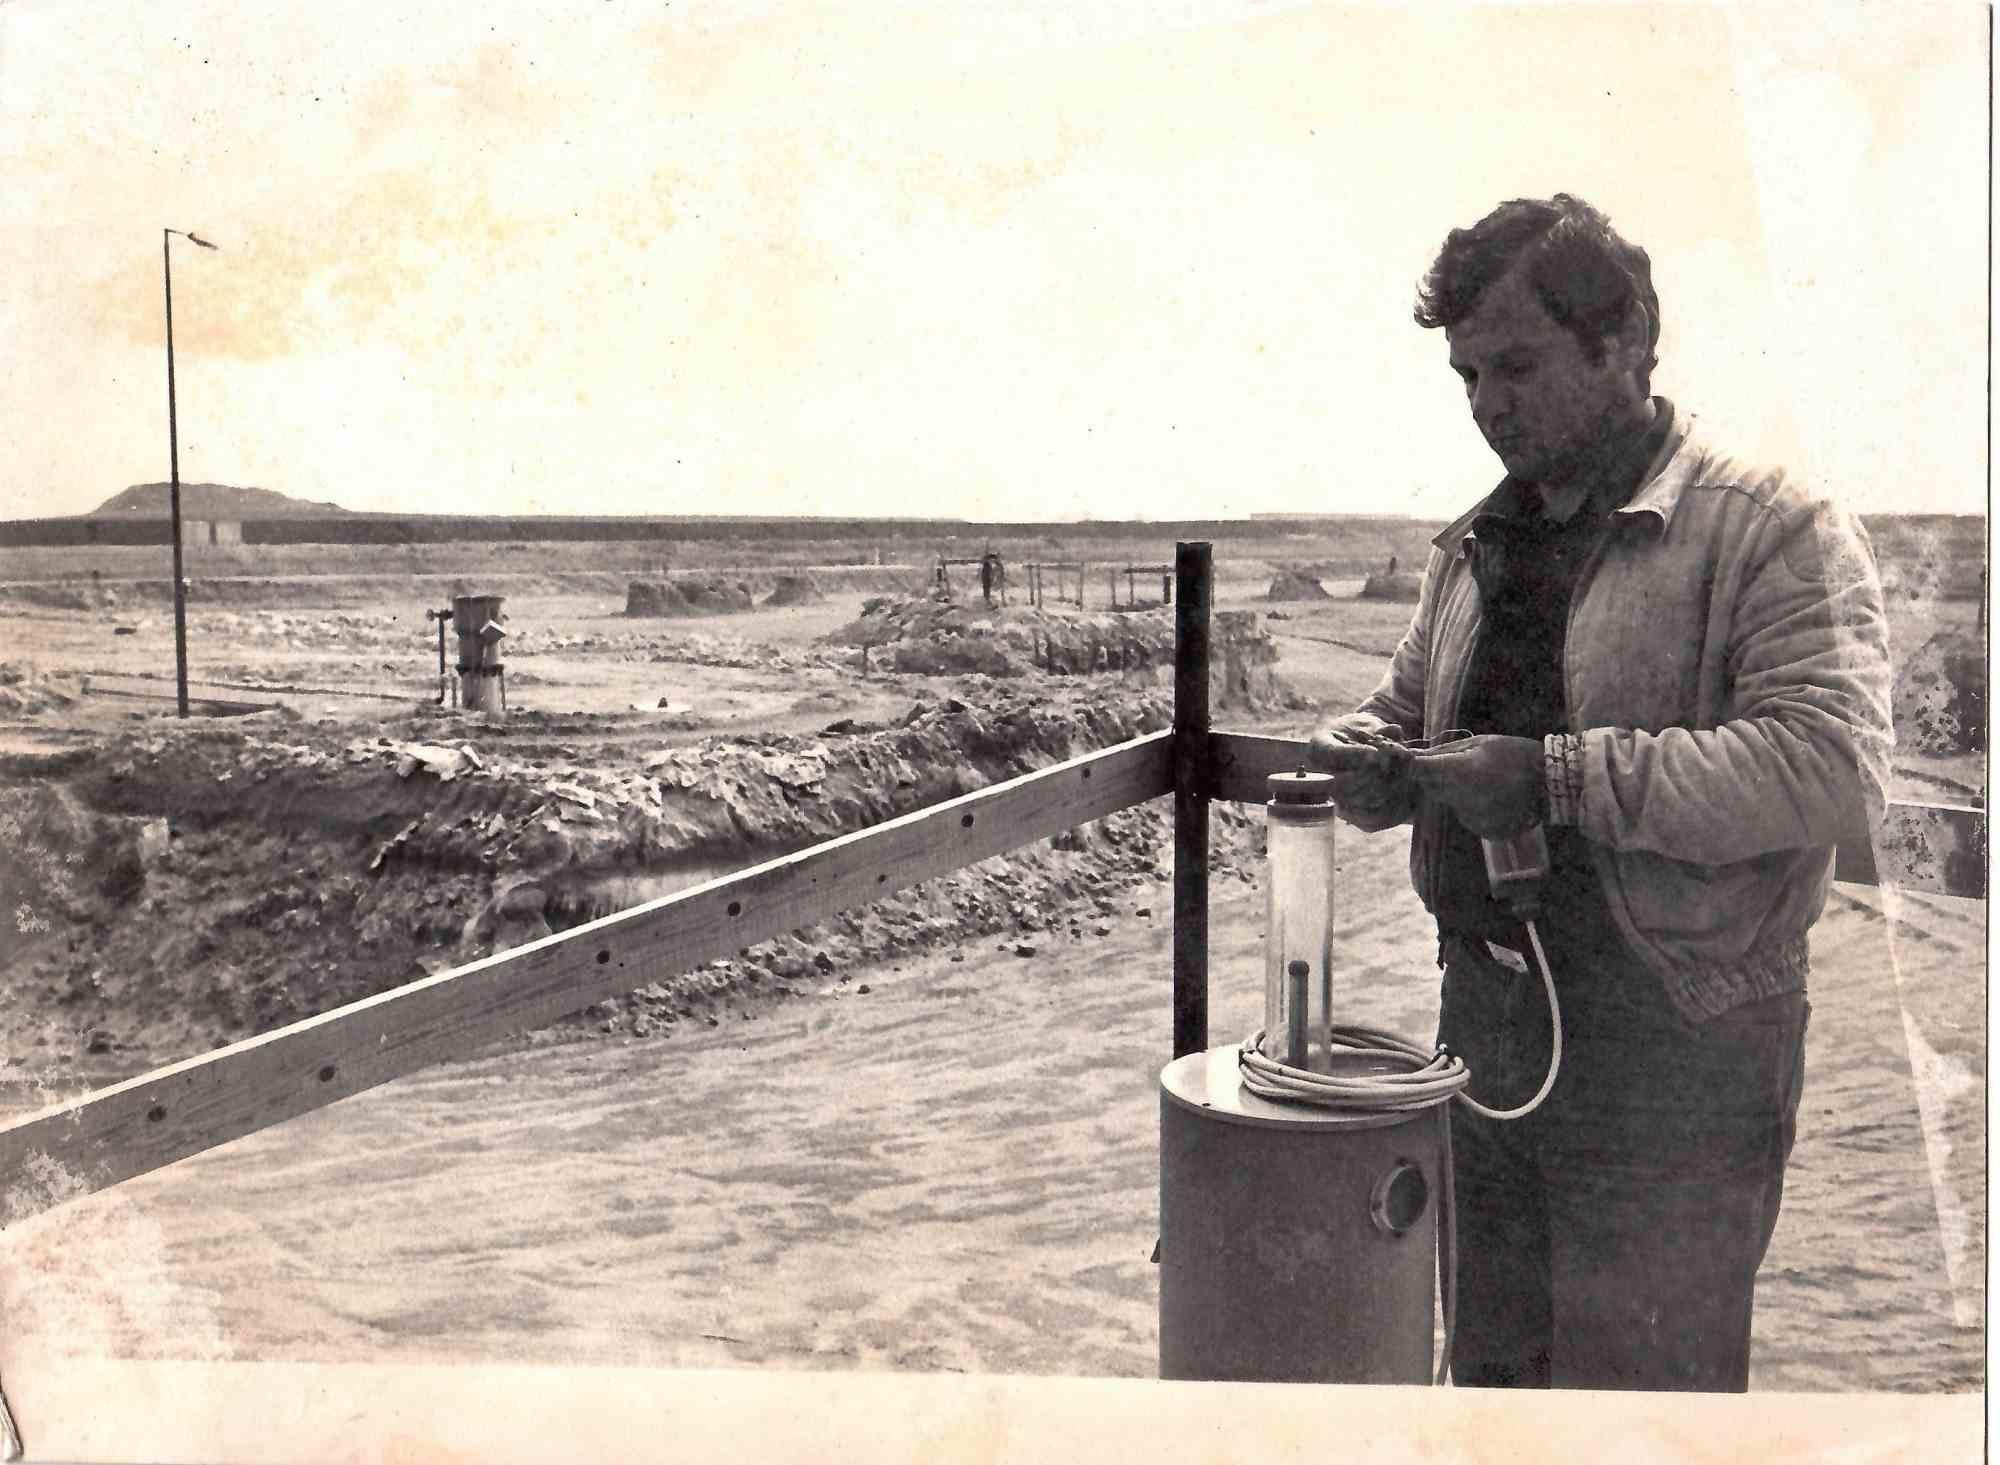 Worker of "Cantiere  Montalto" - Vintage Photograph - Late 20th Century